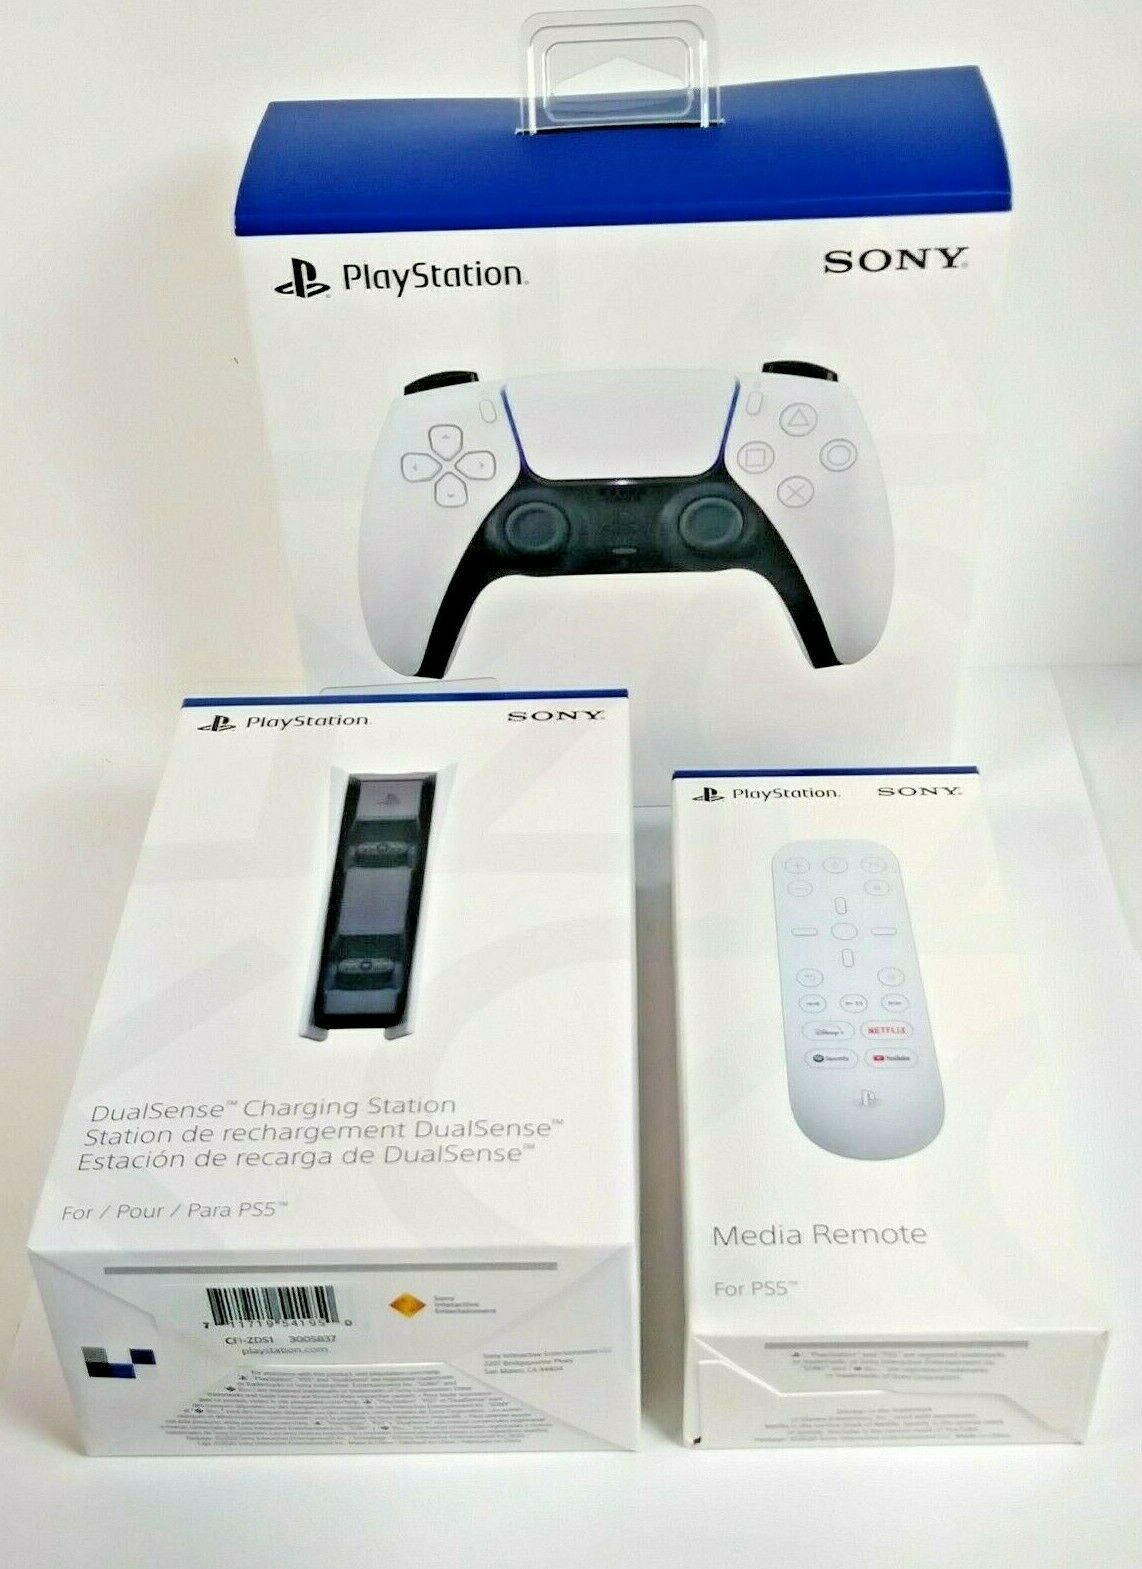 Sony Playstation 5 Ps5 Accessories Bundle Controller Charger Media Remote New